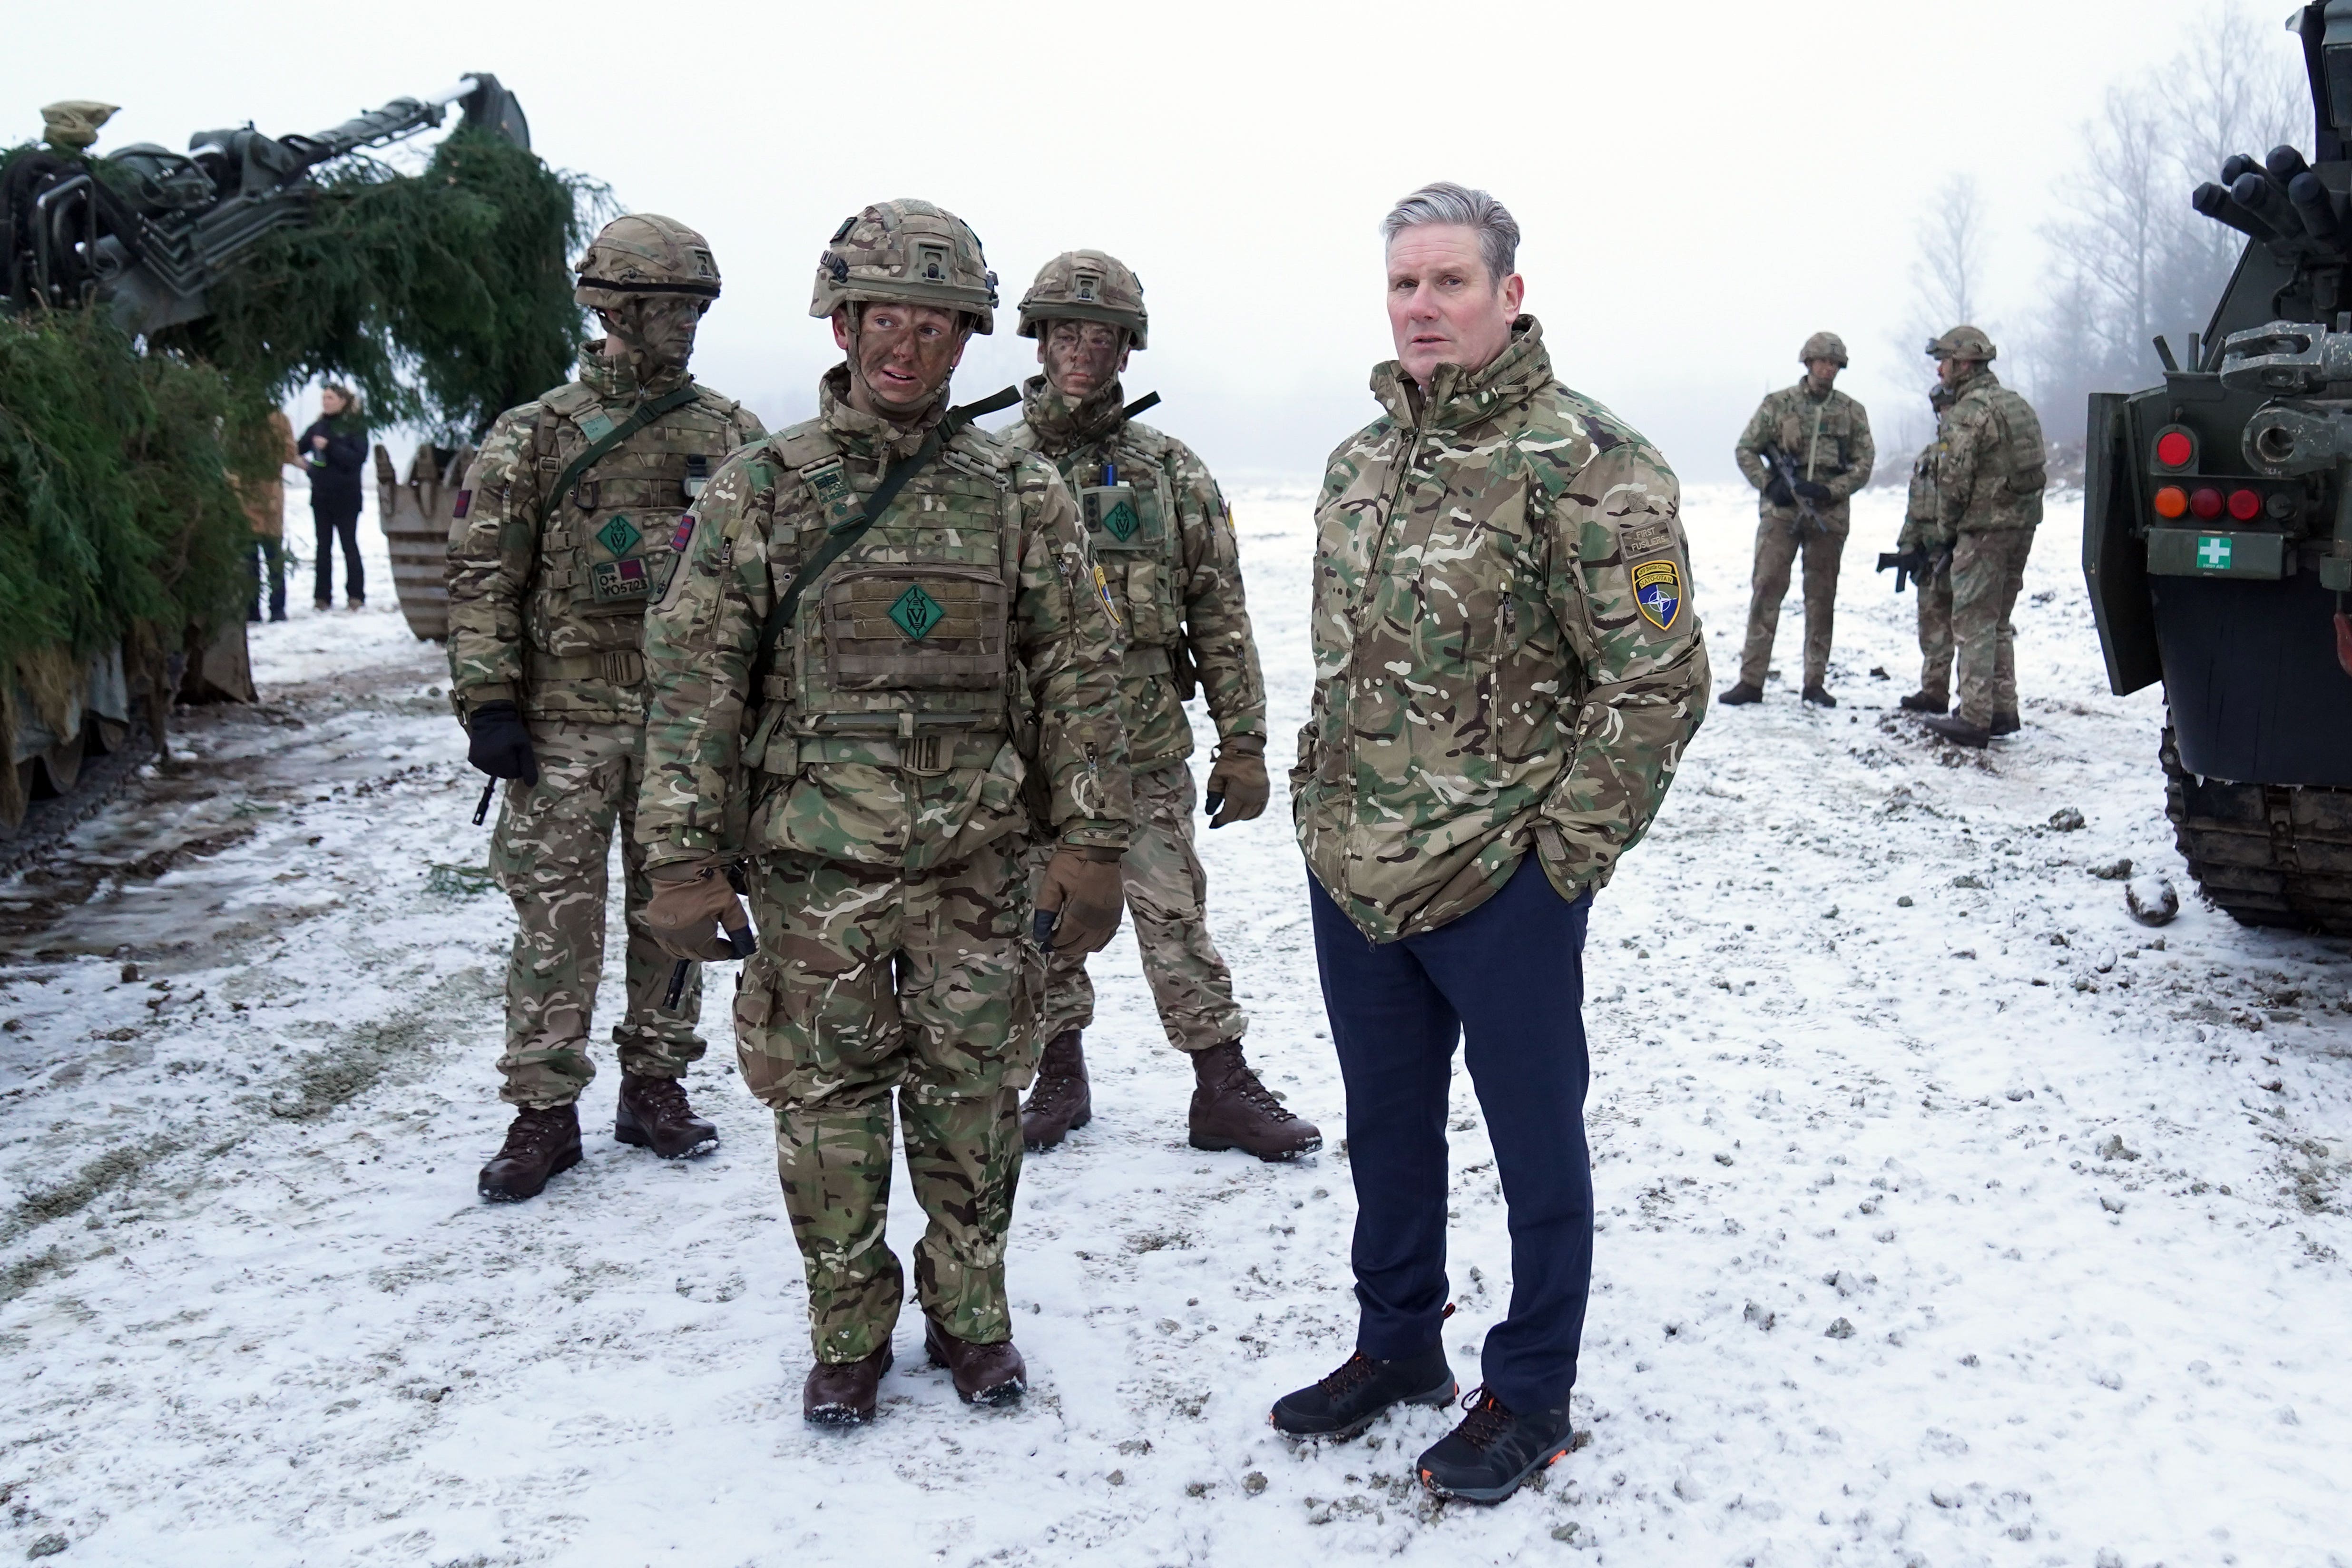 Labour leader Sir Keir Starmer during his visit to meet British troops at Tapa forward operating Nato base, near the Russian border in Estonia (PA)